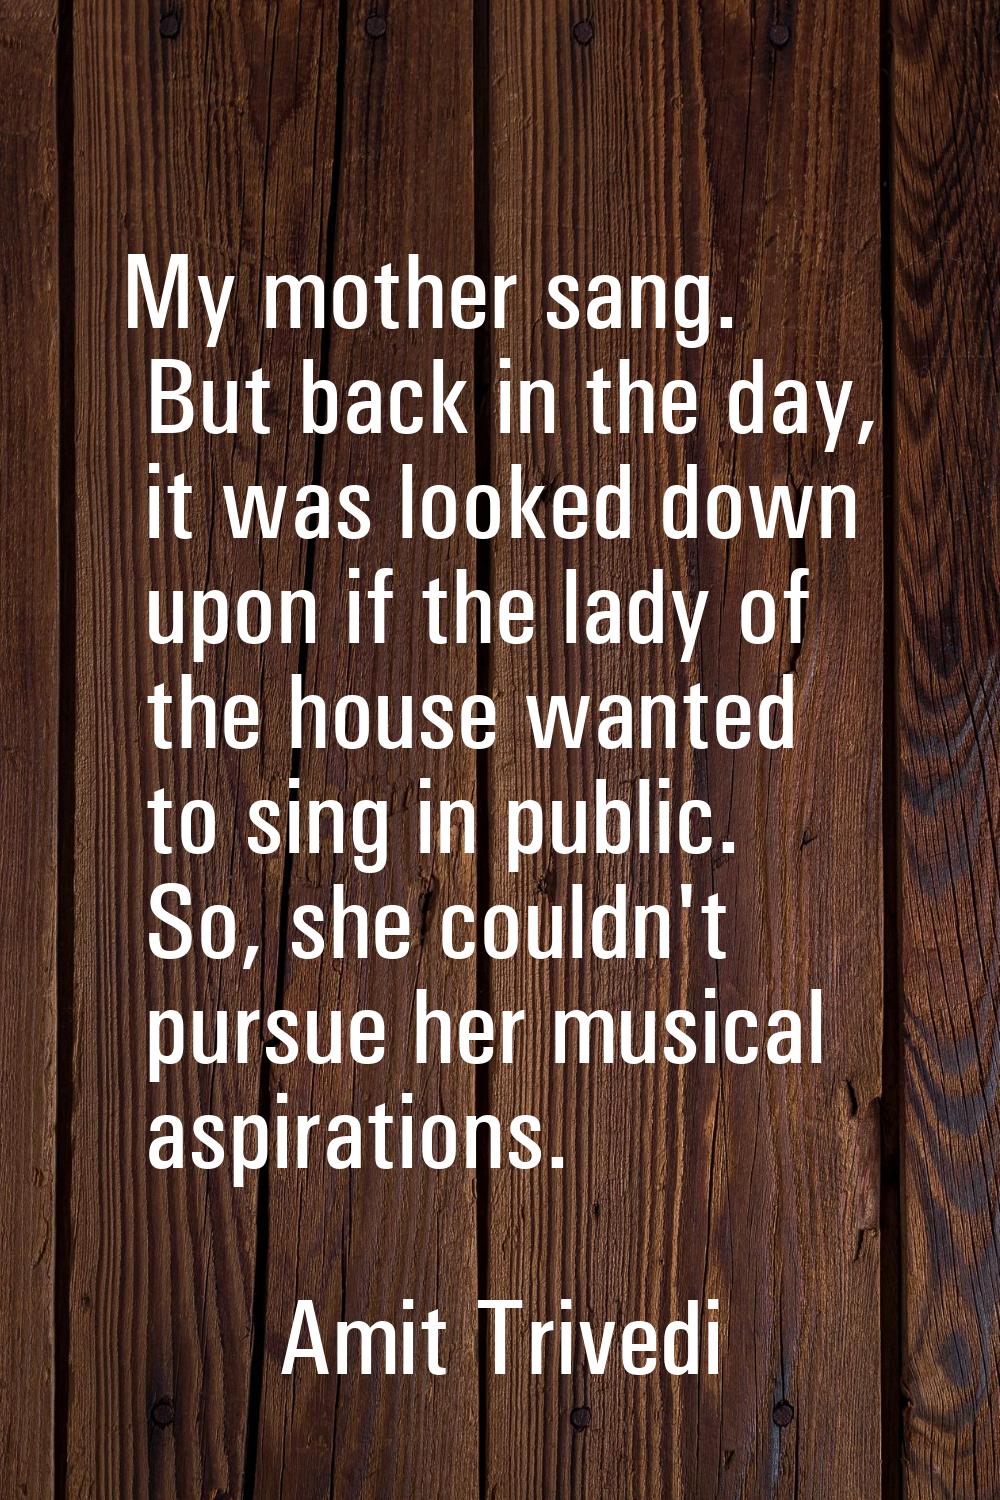 My mother sang. But back in the day, it was looked down upon if the lady of the house wanted to sin